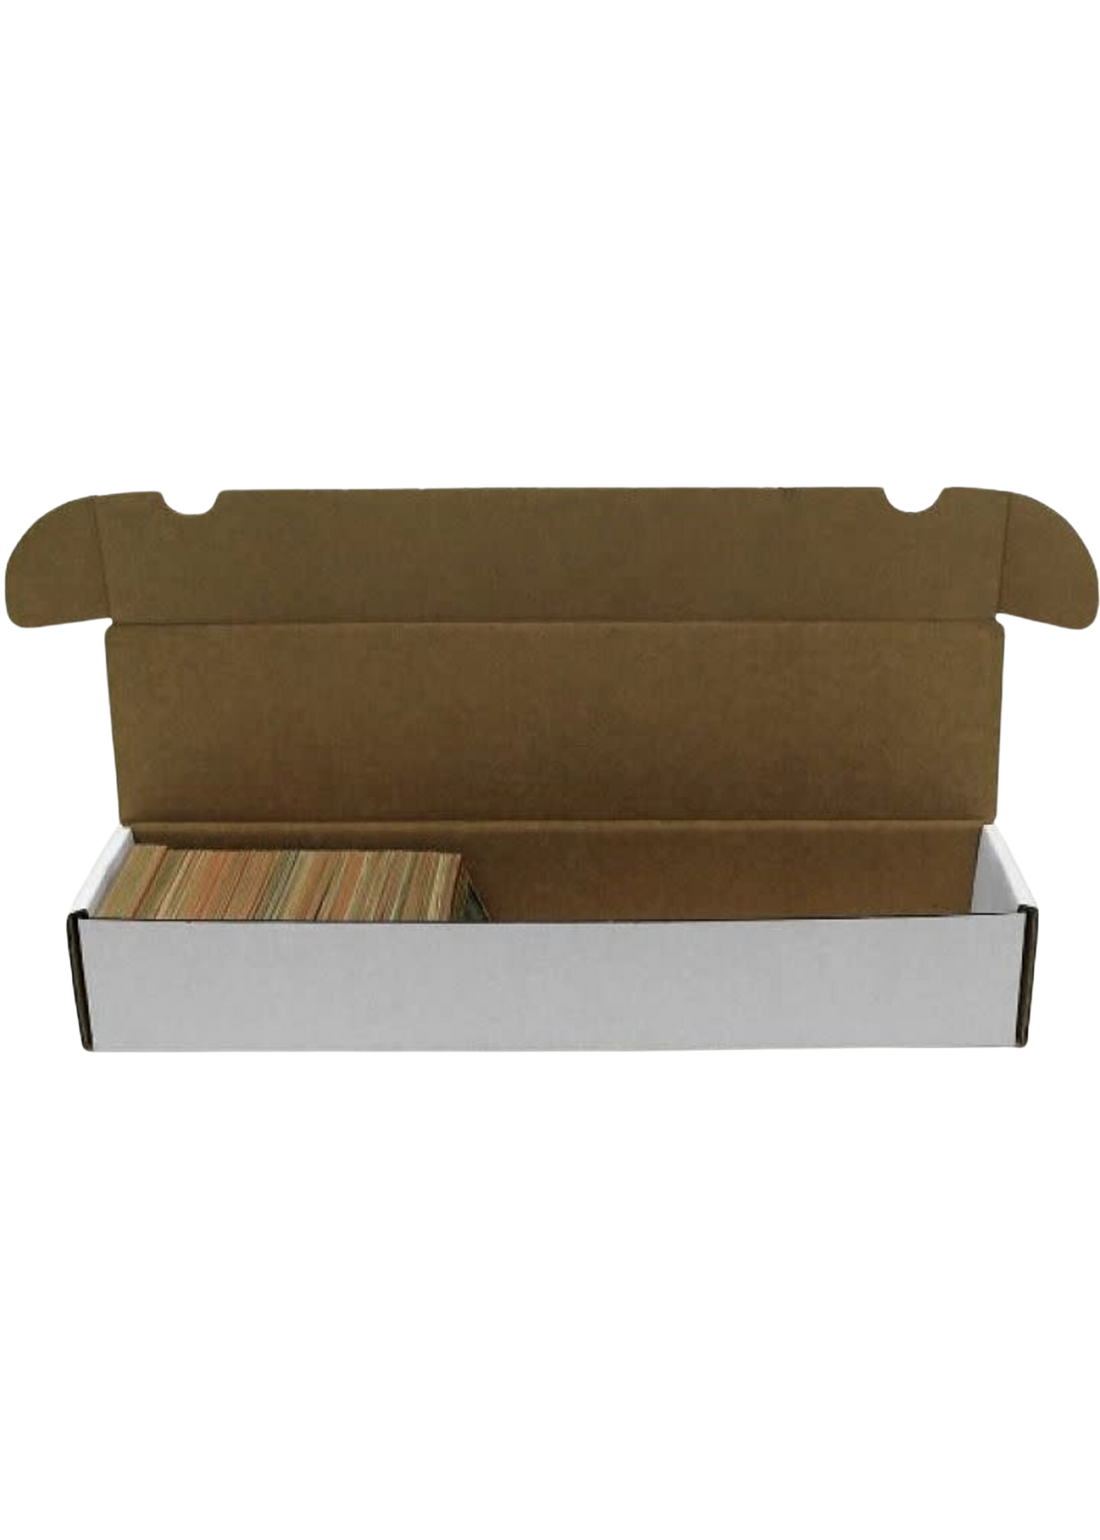 Cardbox / Fold-out Box for Storage of 1.000 Cards